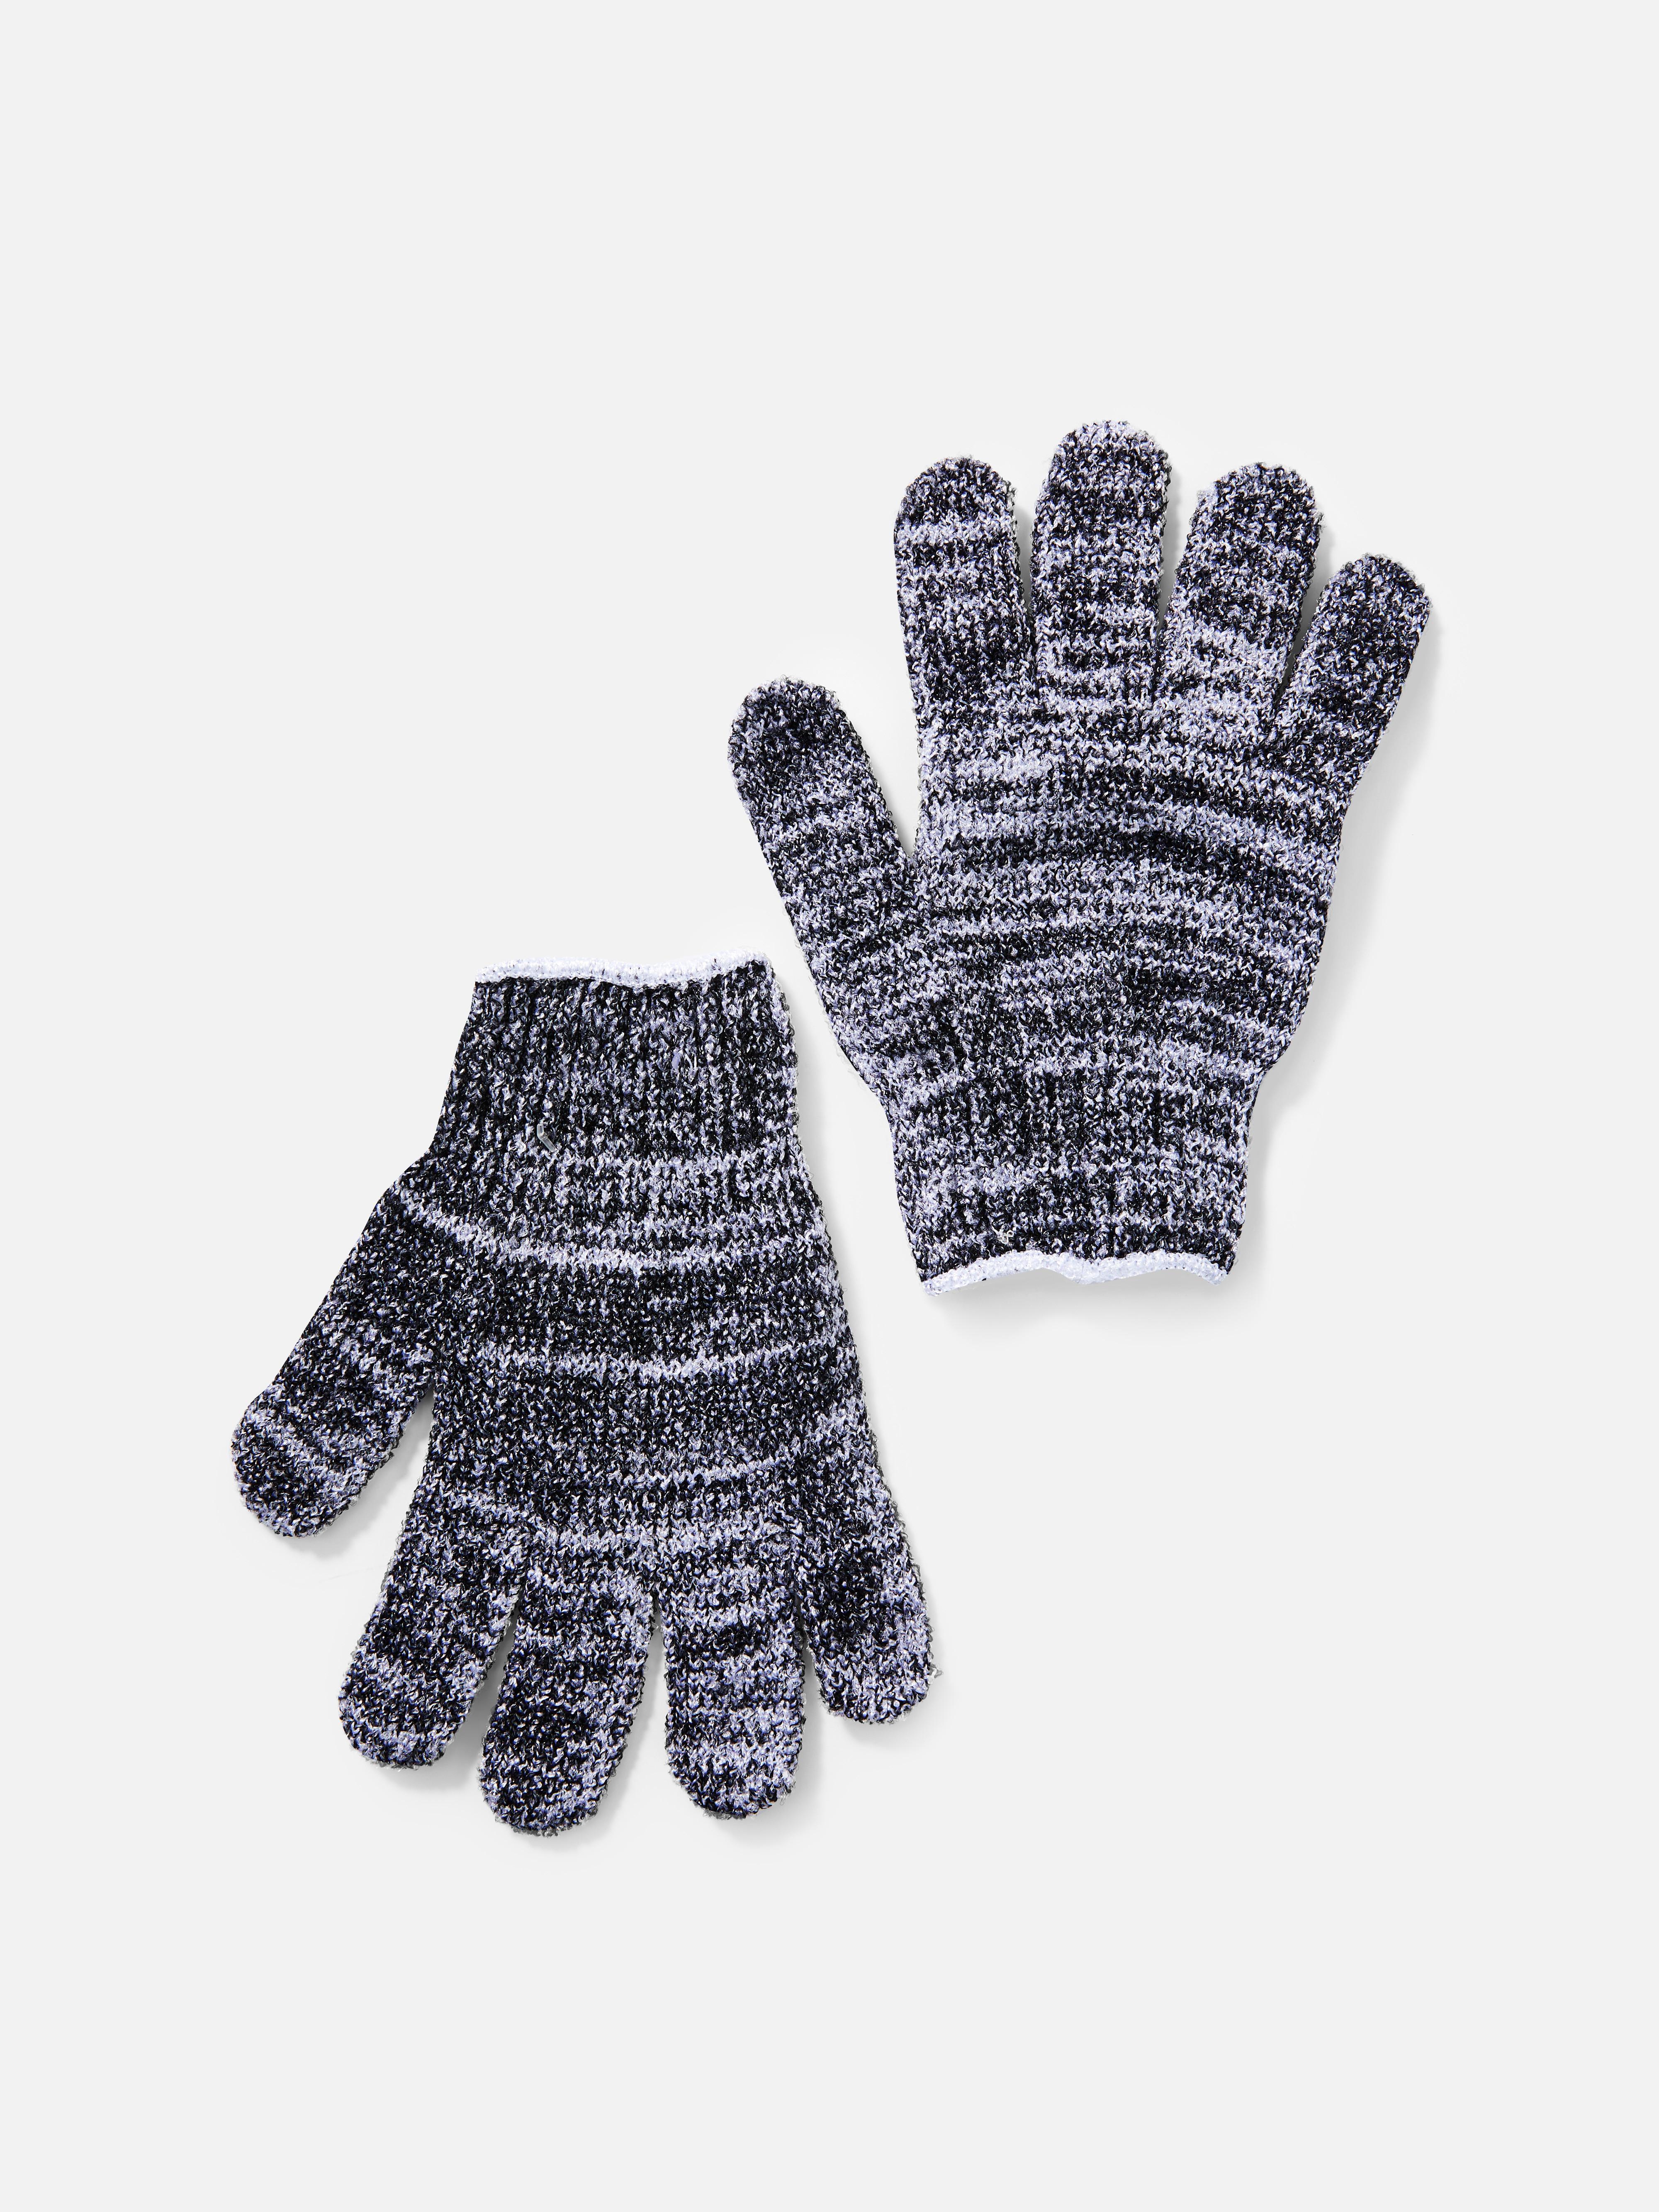 Charcoal Infused Exfoliating Glove